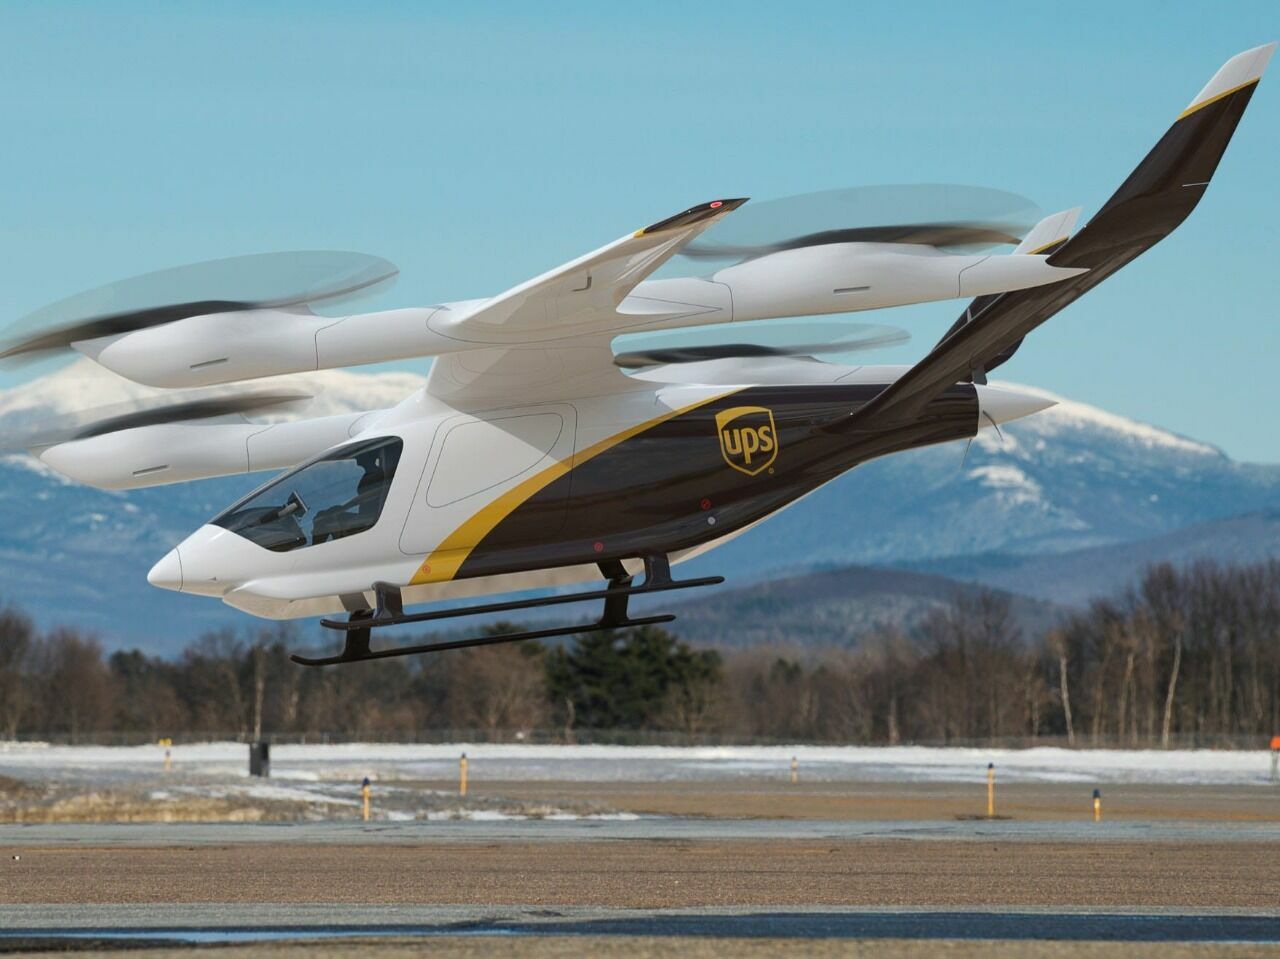 Taking off from everywhere, landing everywhere: what will be the transport of the near future